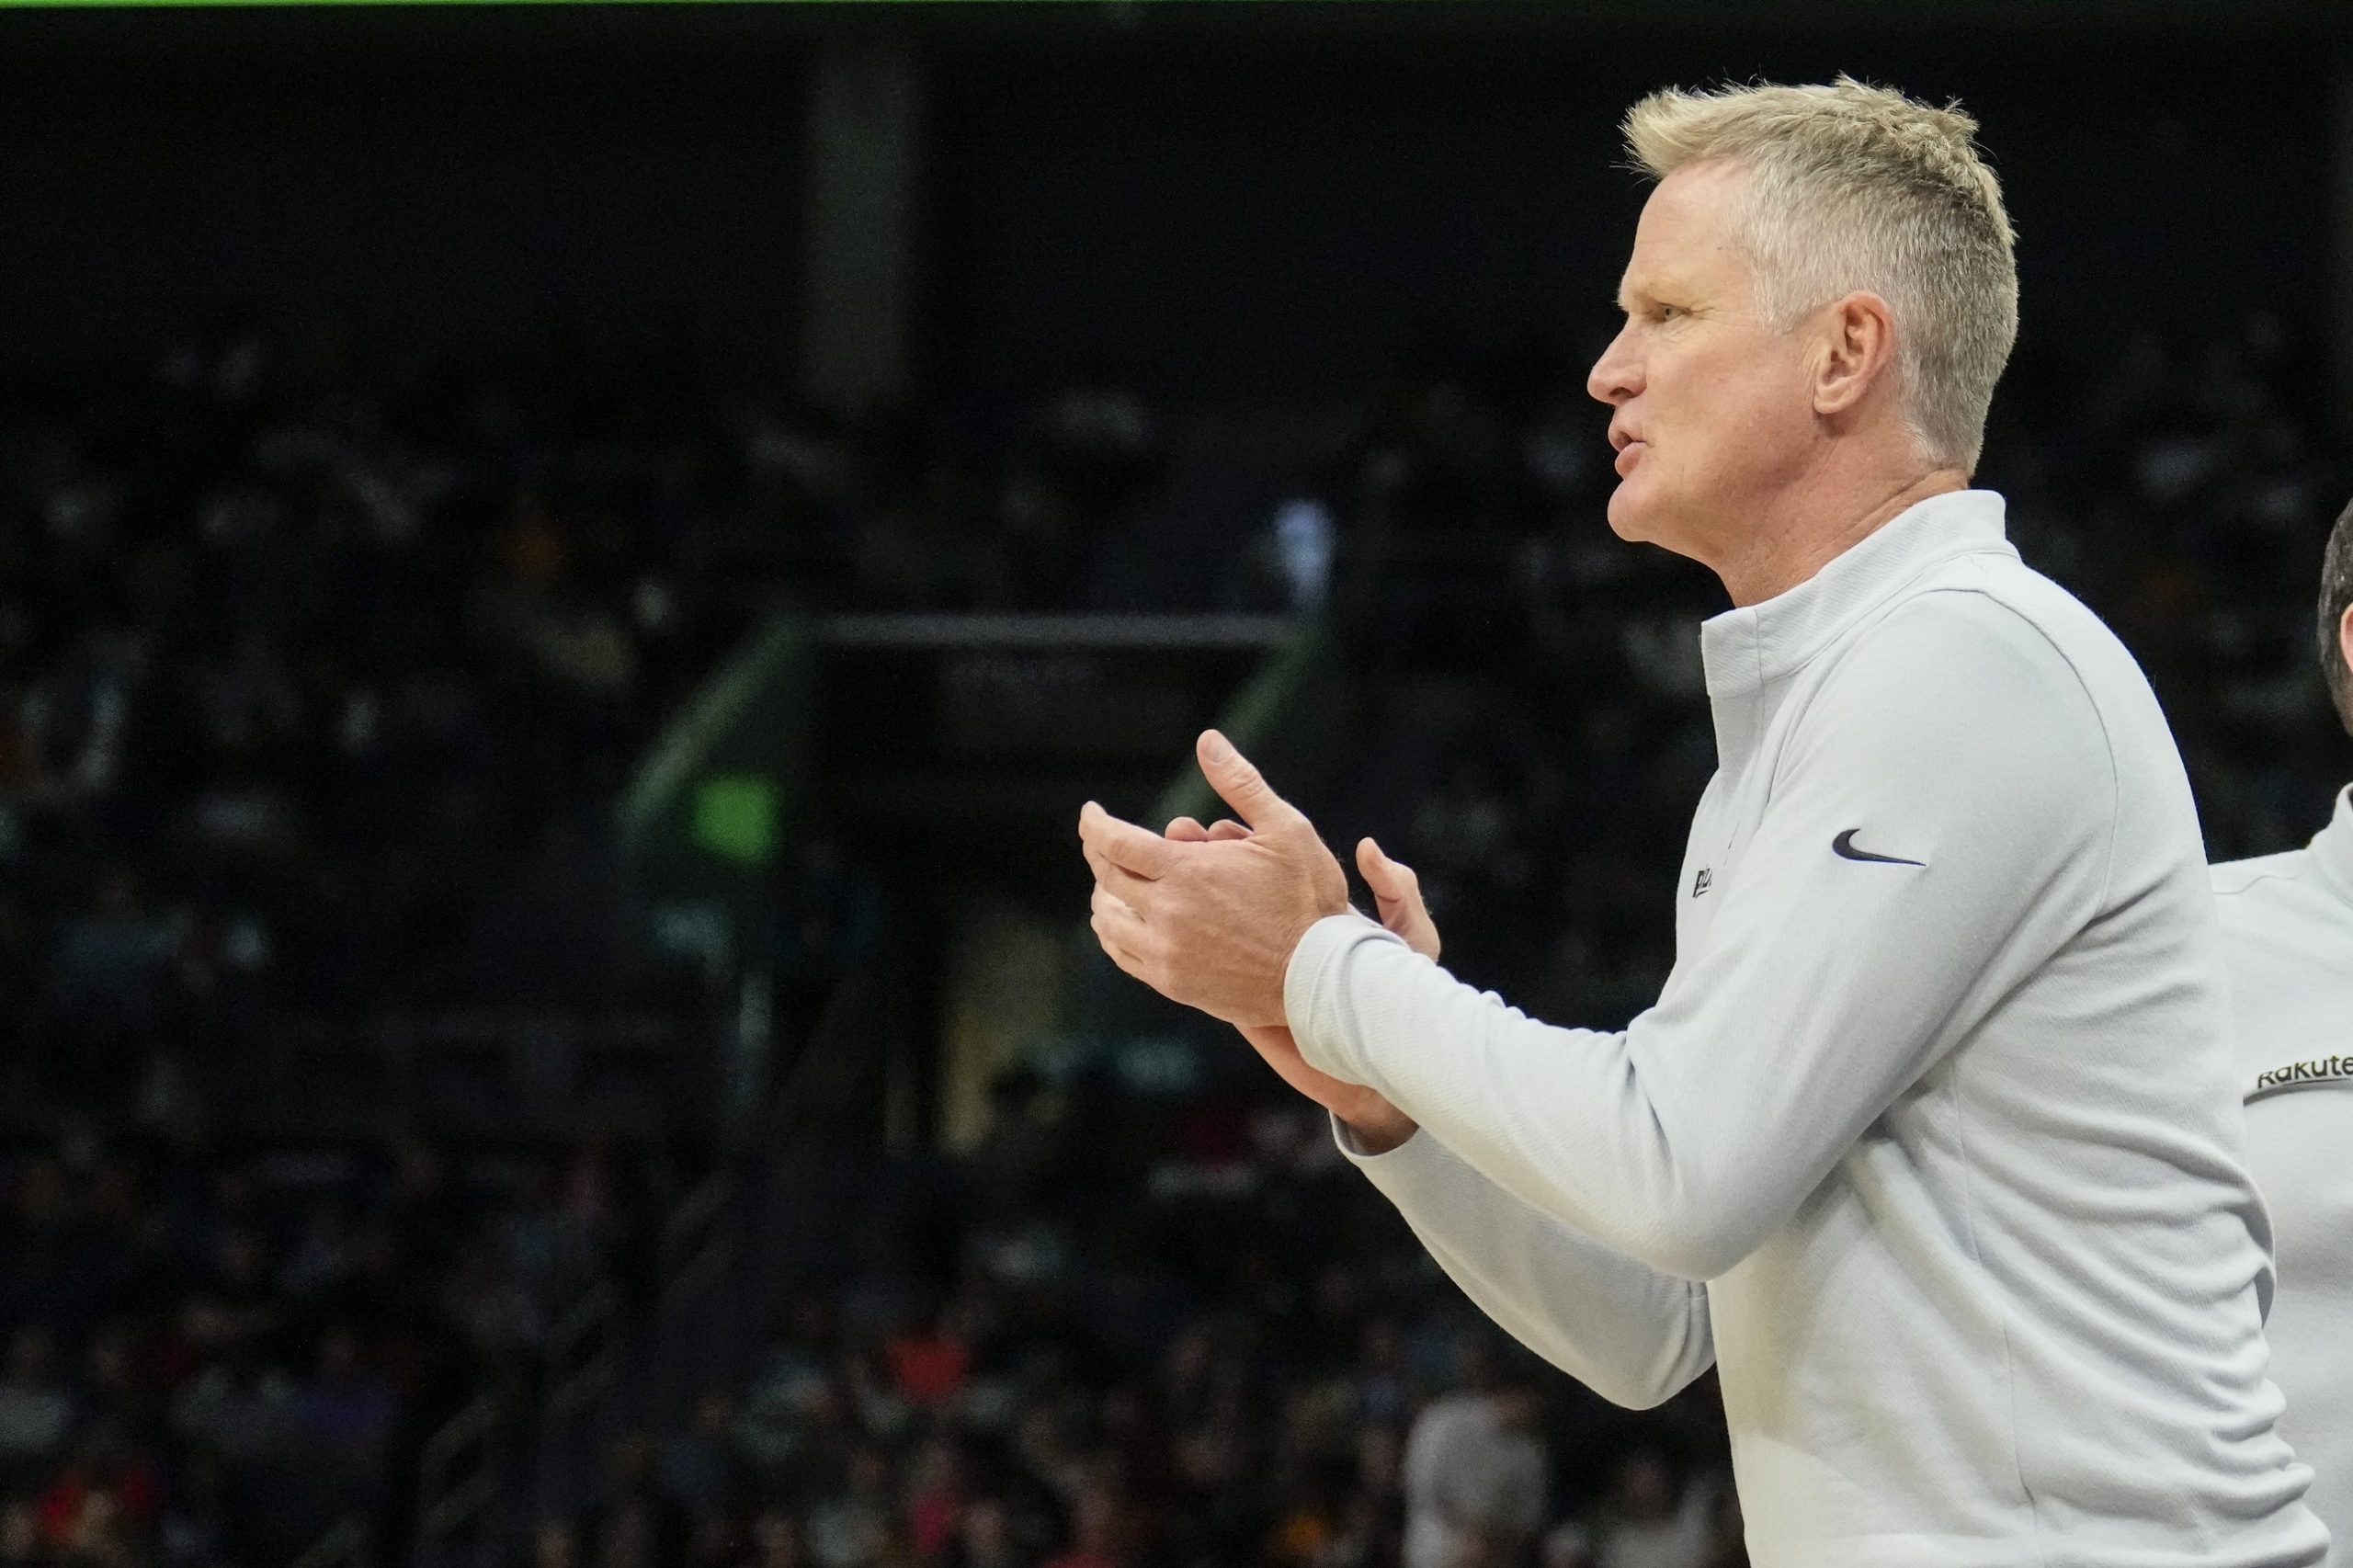 Oct 29, 2022; Charlotte, North Carolina, USA; Golden State Warriors head coach Steve Kerr encourages his team during the second half against the Charlotte Hornets at Spectrum Center. Mandatory Credit: Jim Dedmon-USA TODAY Sports